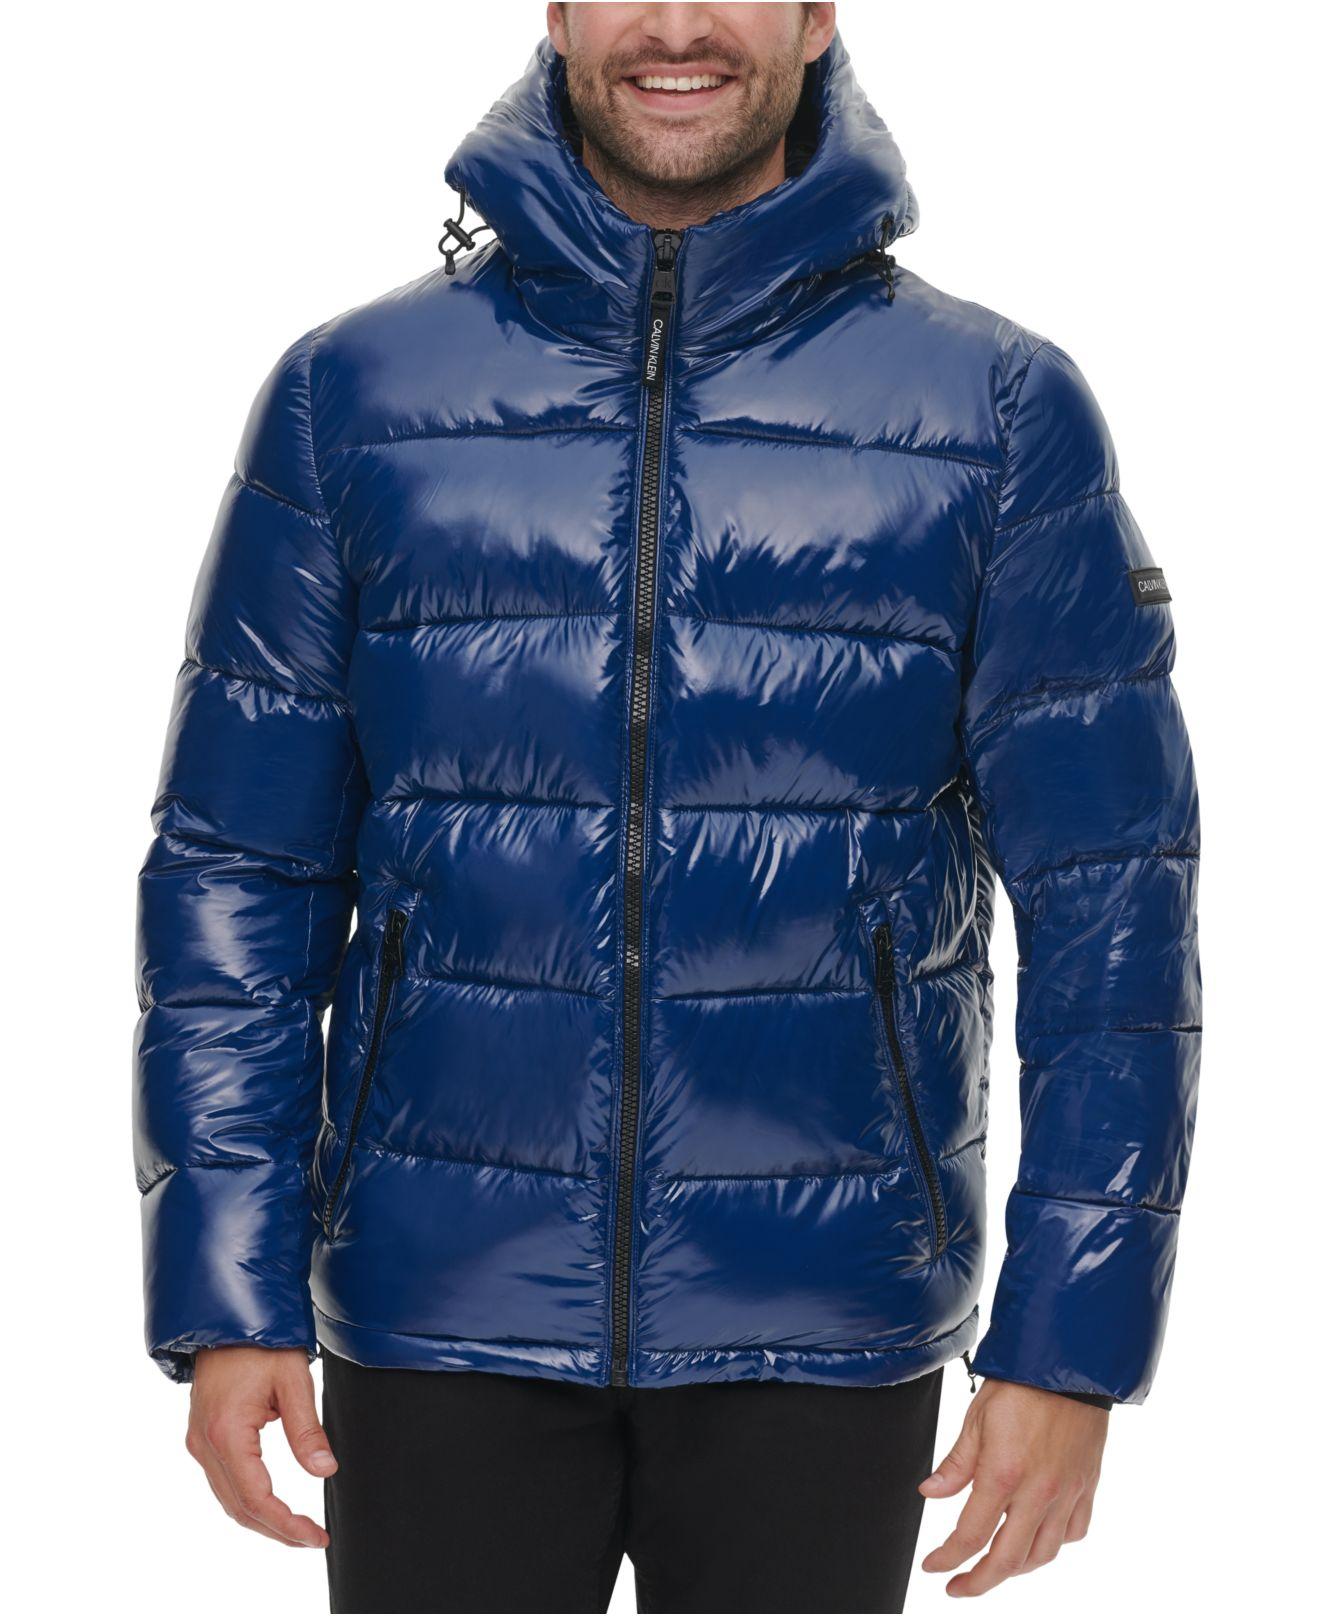 Calvin Klein Synthetic High Shine Puffer Jacket in Blue for Men - Lyst